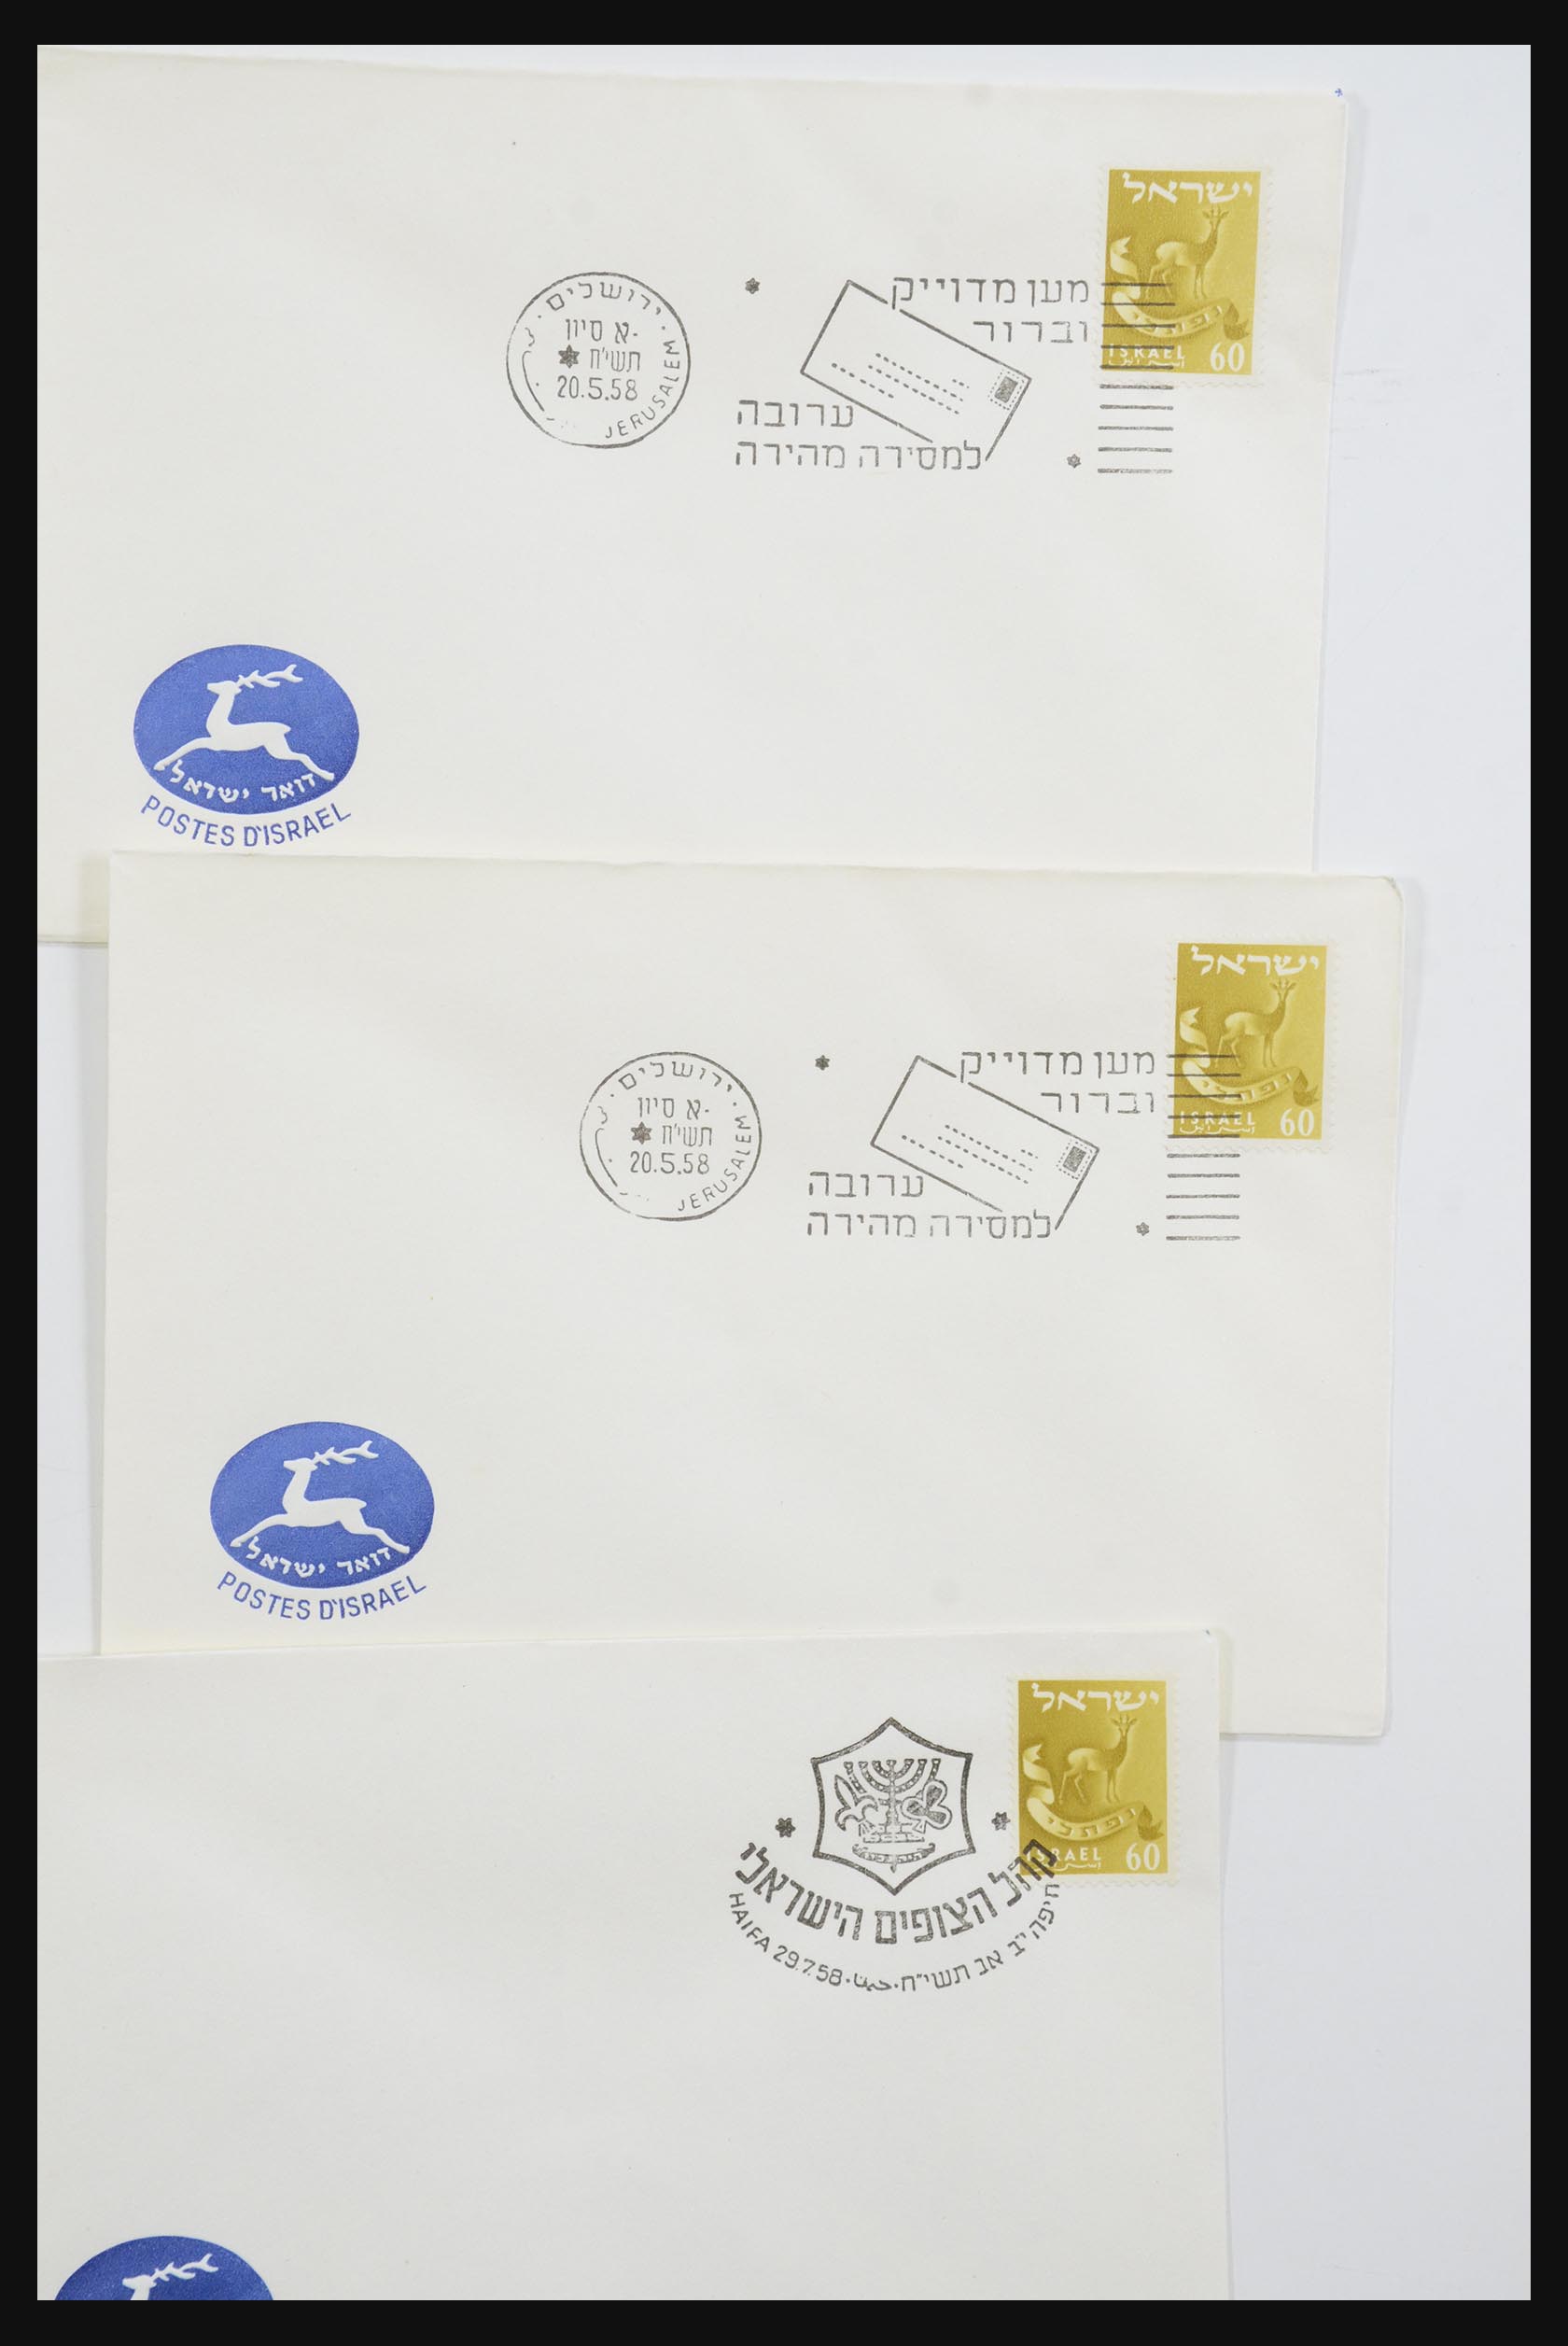 31924 036 - 31924 Israël fdc-collectie 1957-2003.